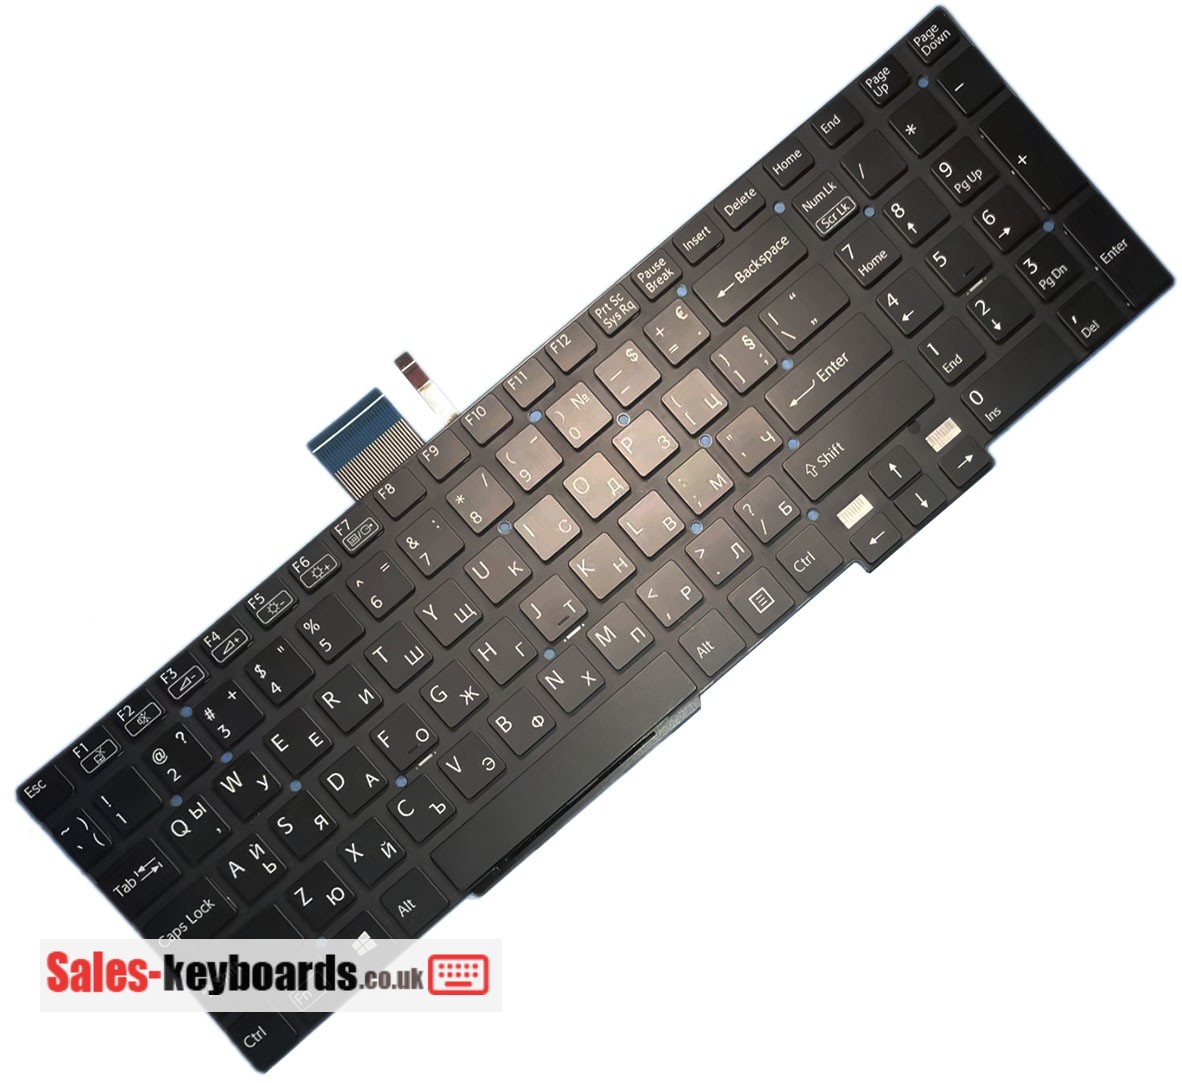 Sony VAIO SVT1511M1RS Keyboard replacement